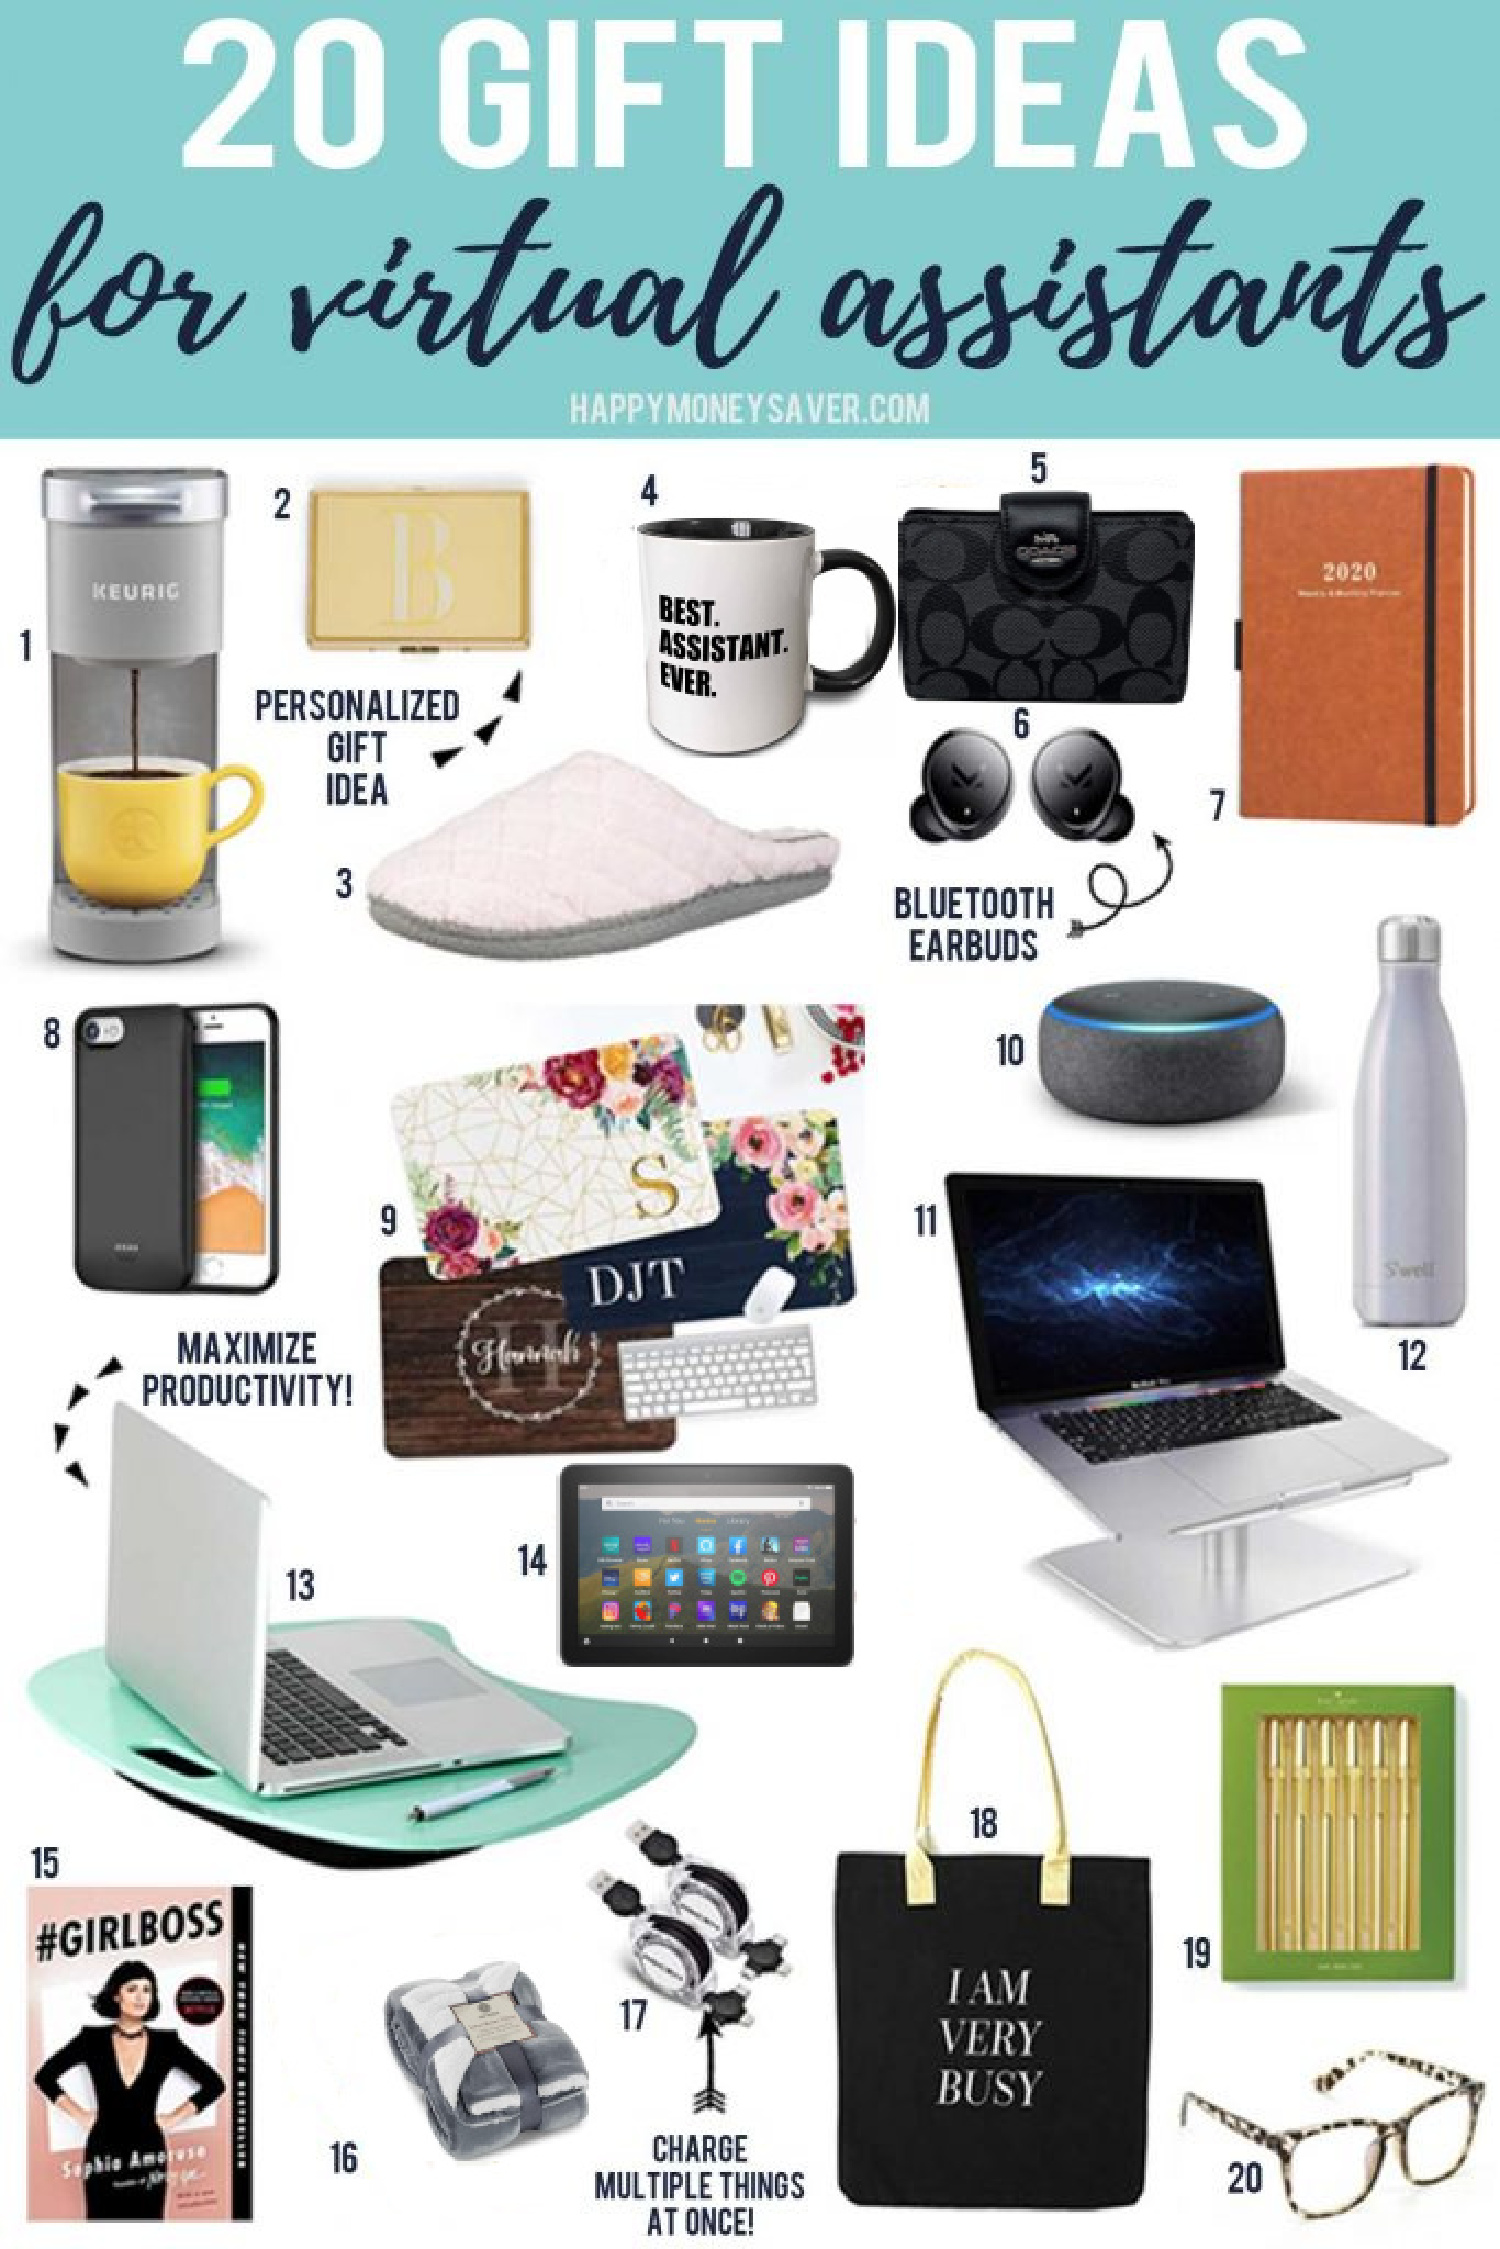 20 Gift Ideas For Virtual Assistants by happymoneysaver.com words with pictures of each item numbered 1-20.